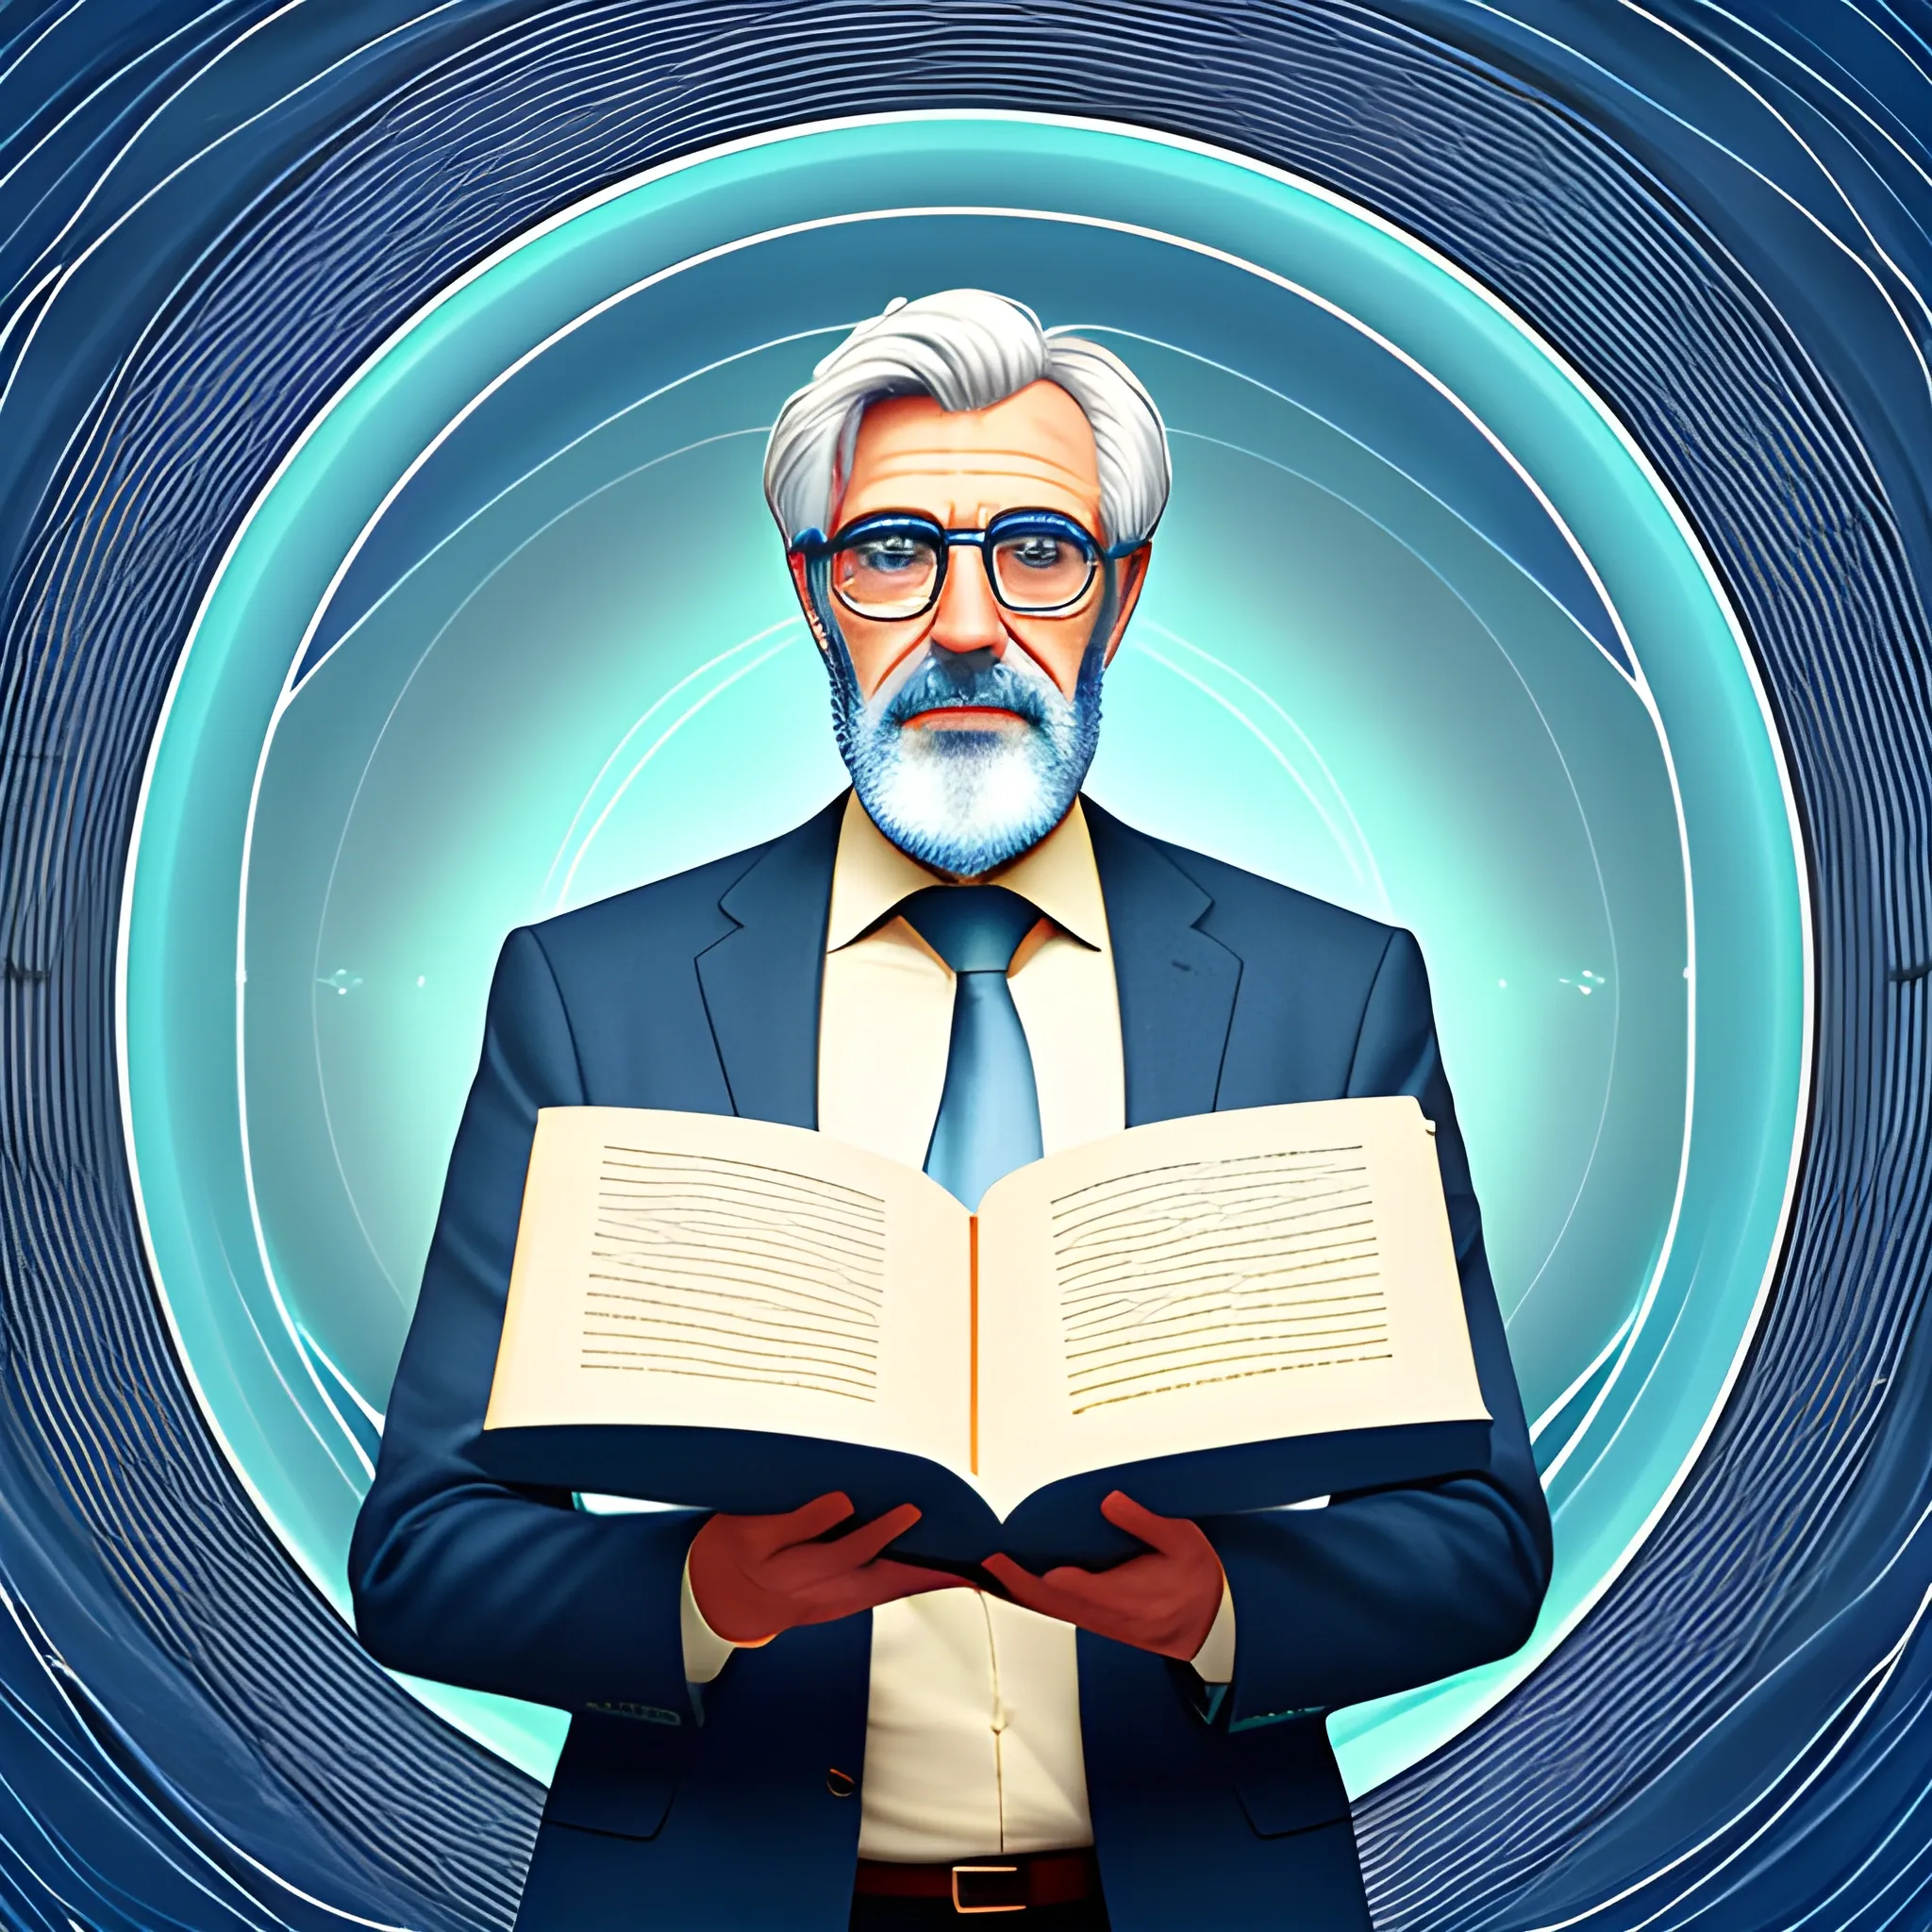 It generates a hyper-realistic image of a school classroom with golden sunset light filtering through the window. In the center of the room, visualize a middle-aged teacher with tousled gray hair and round reading glasses, wearing a dark blue wool sweater and gray cloth pants. This professor is holding an old hardcover book with numerous colorful sticky notes protruding from the pages. In front of him is a holographic representation in shades of blue of ChatGPT, visualized as floating lines and curves forming a human face in the midst of detailed explanation